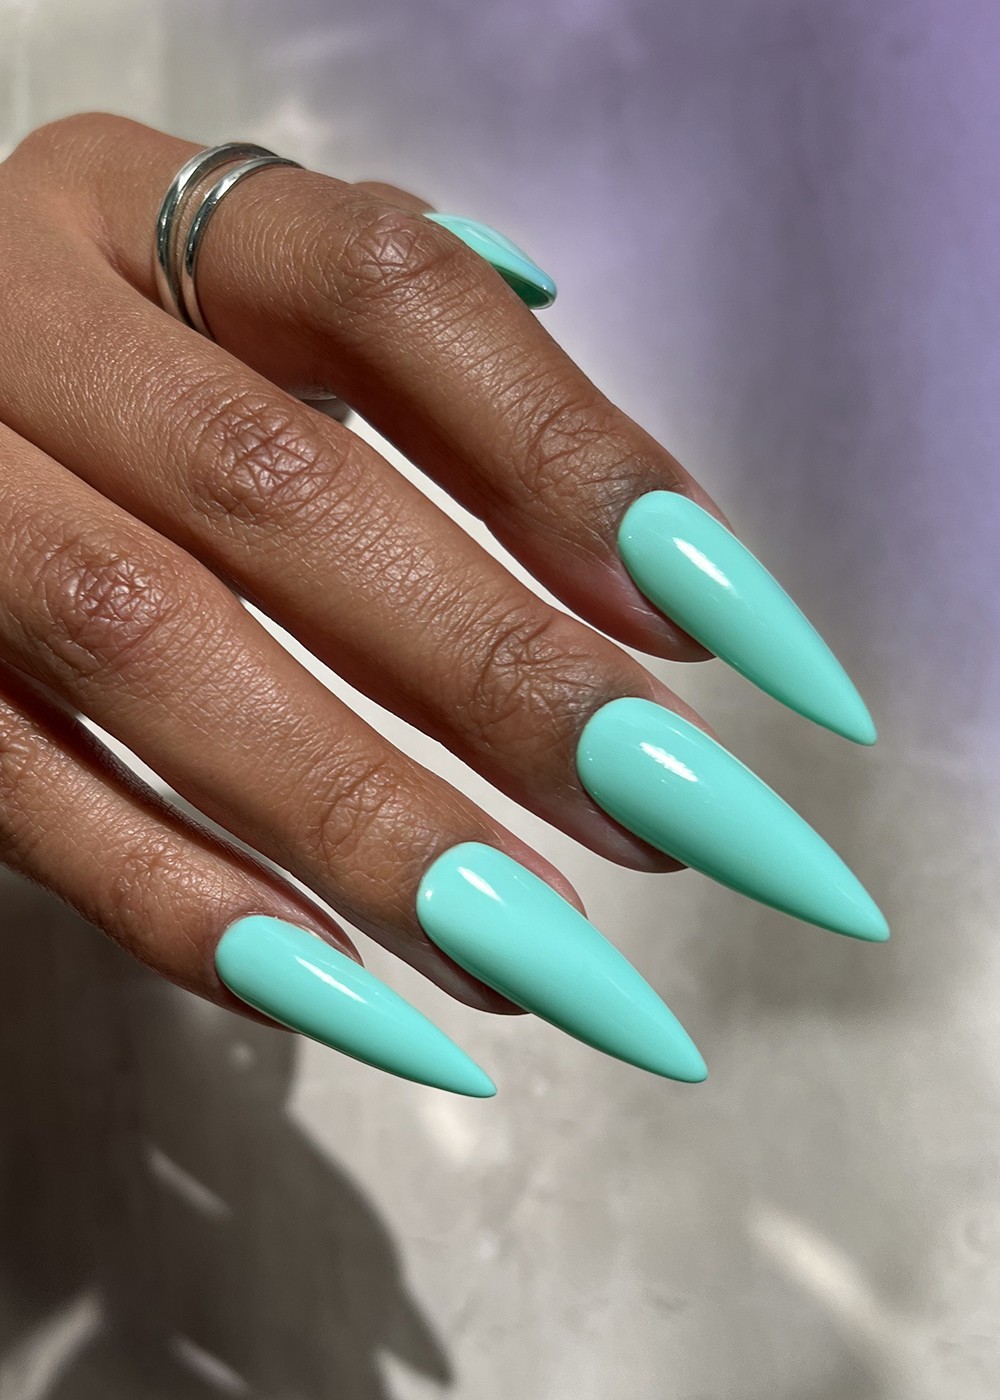 Mix and Match Nails Designs That Major On Individuality | Glamour UK